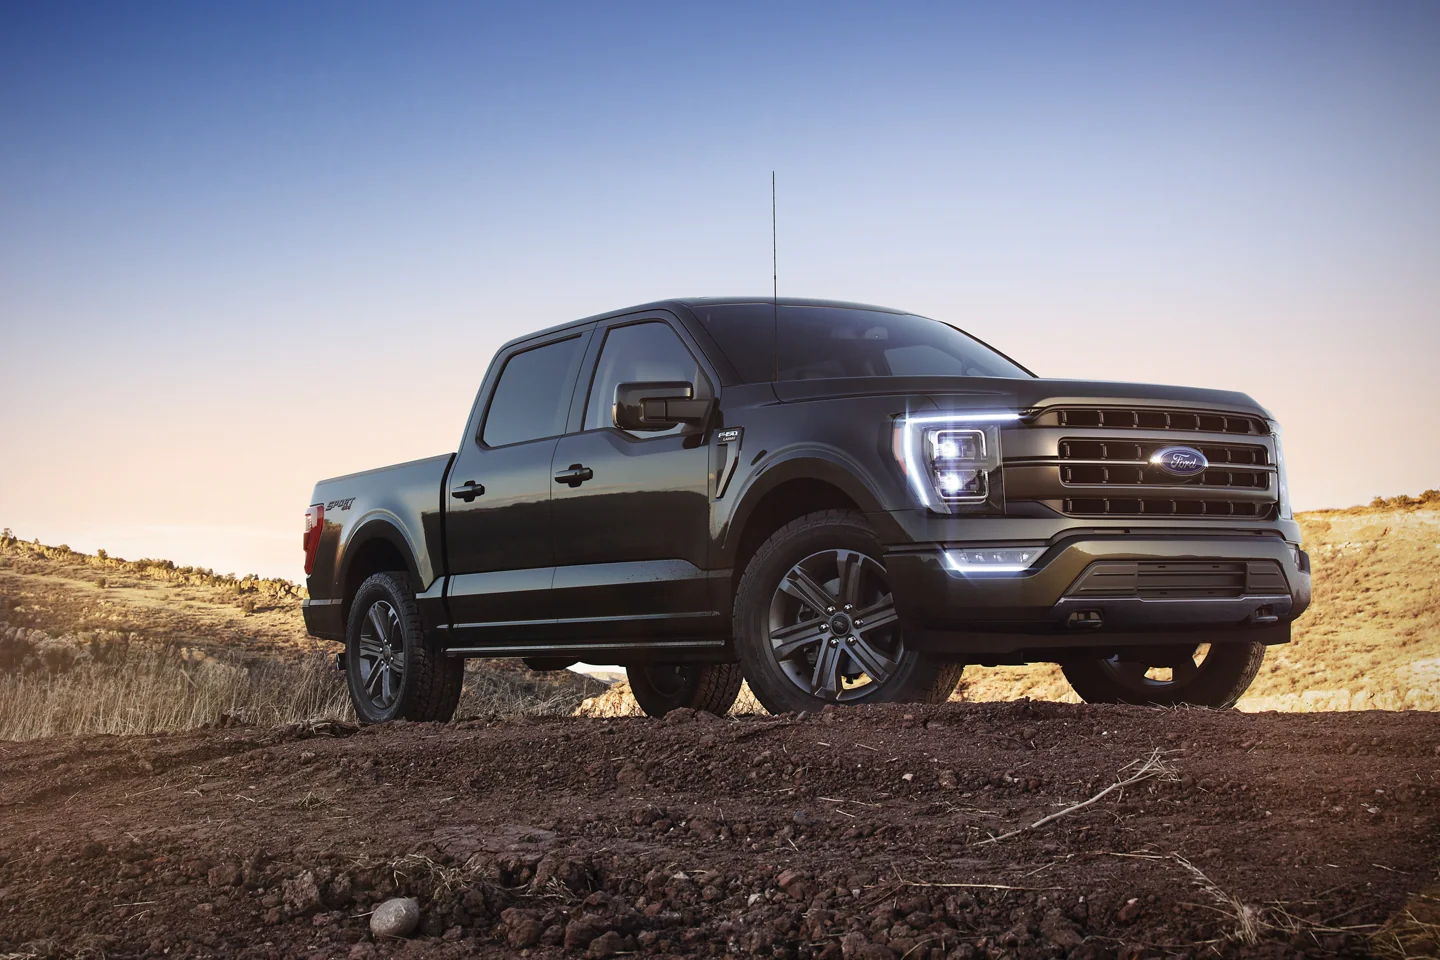 Where is the Ford F-150 made?